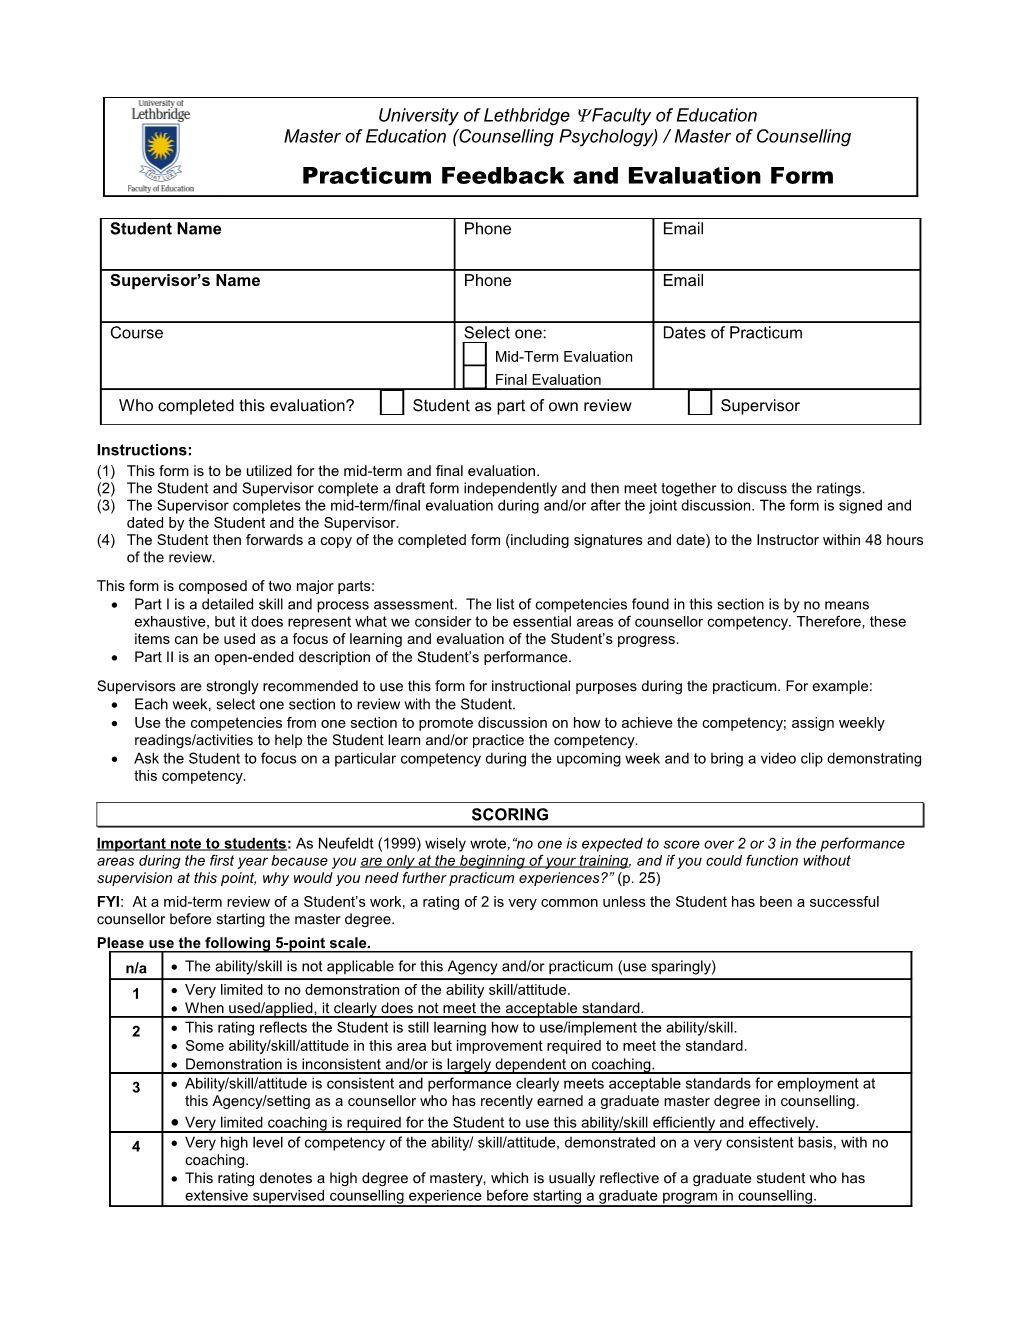 (1)This Form Is to Be Utilized for the Mid-Term and Final Evaluation